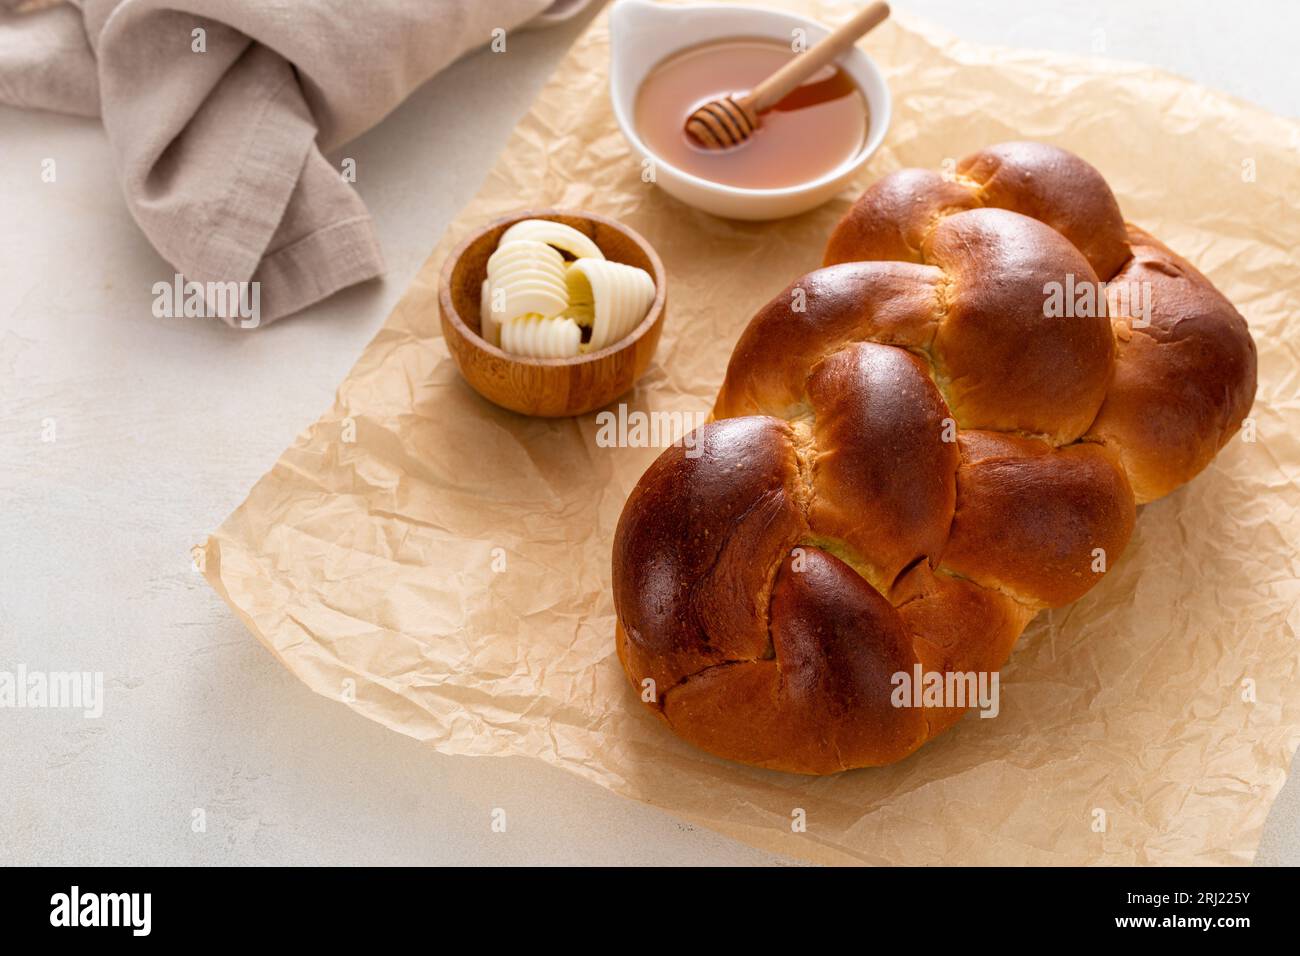 https://c8.alamy.com/comp/2RJ225Y/freshly-baked-hallah-served-with-butter-and-honey-2RJ225Y.jpg